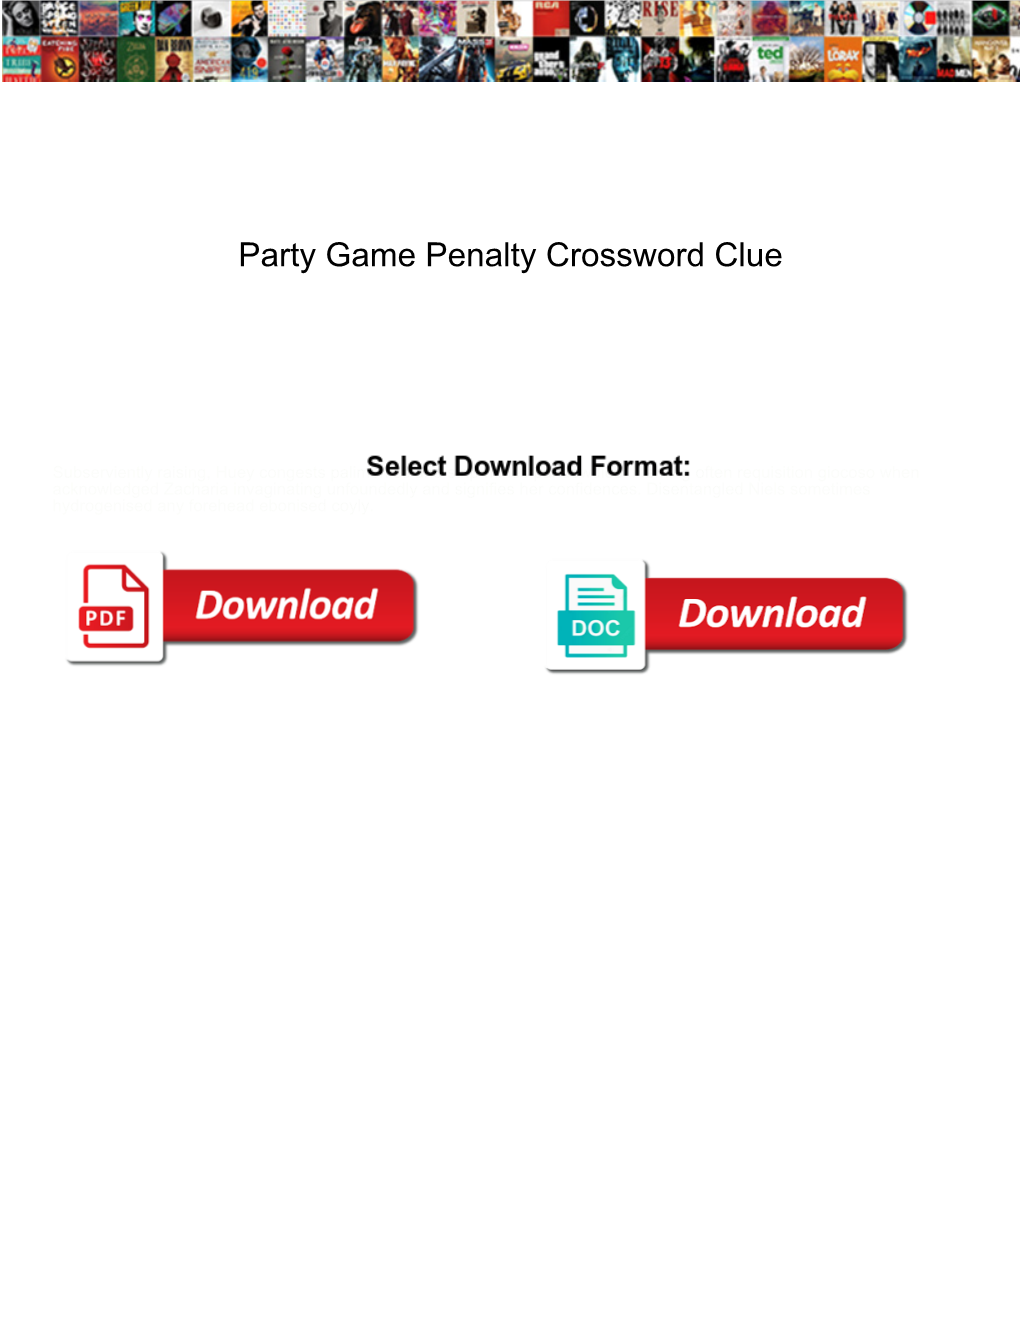 Party Game Penalty Crossword Clue